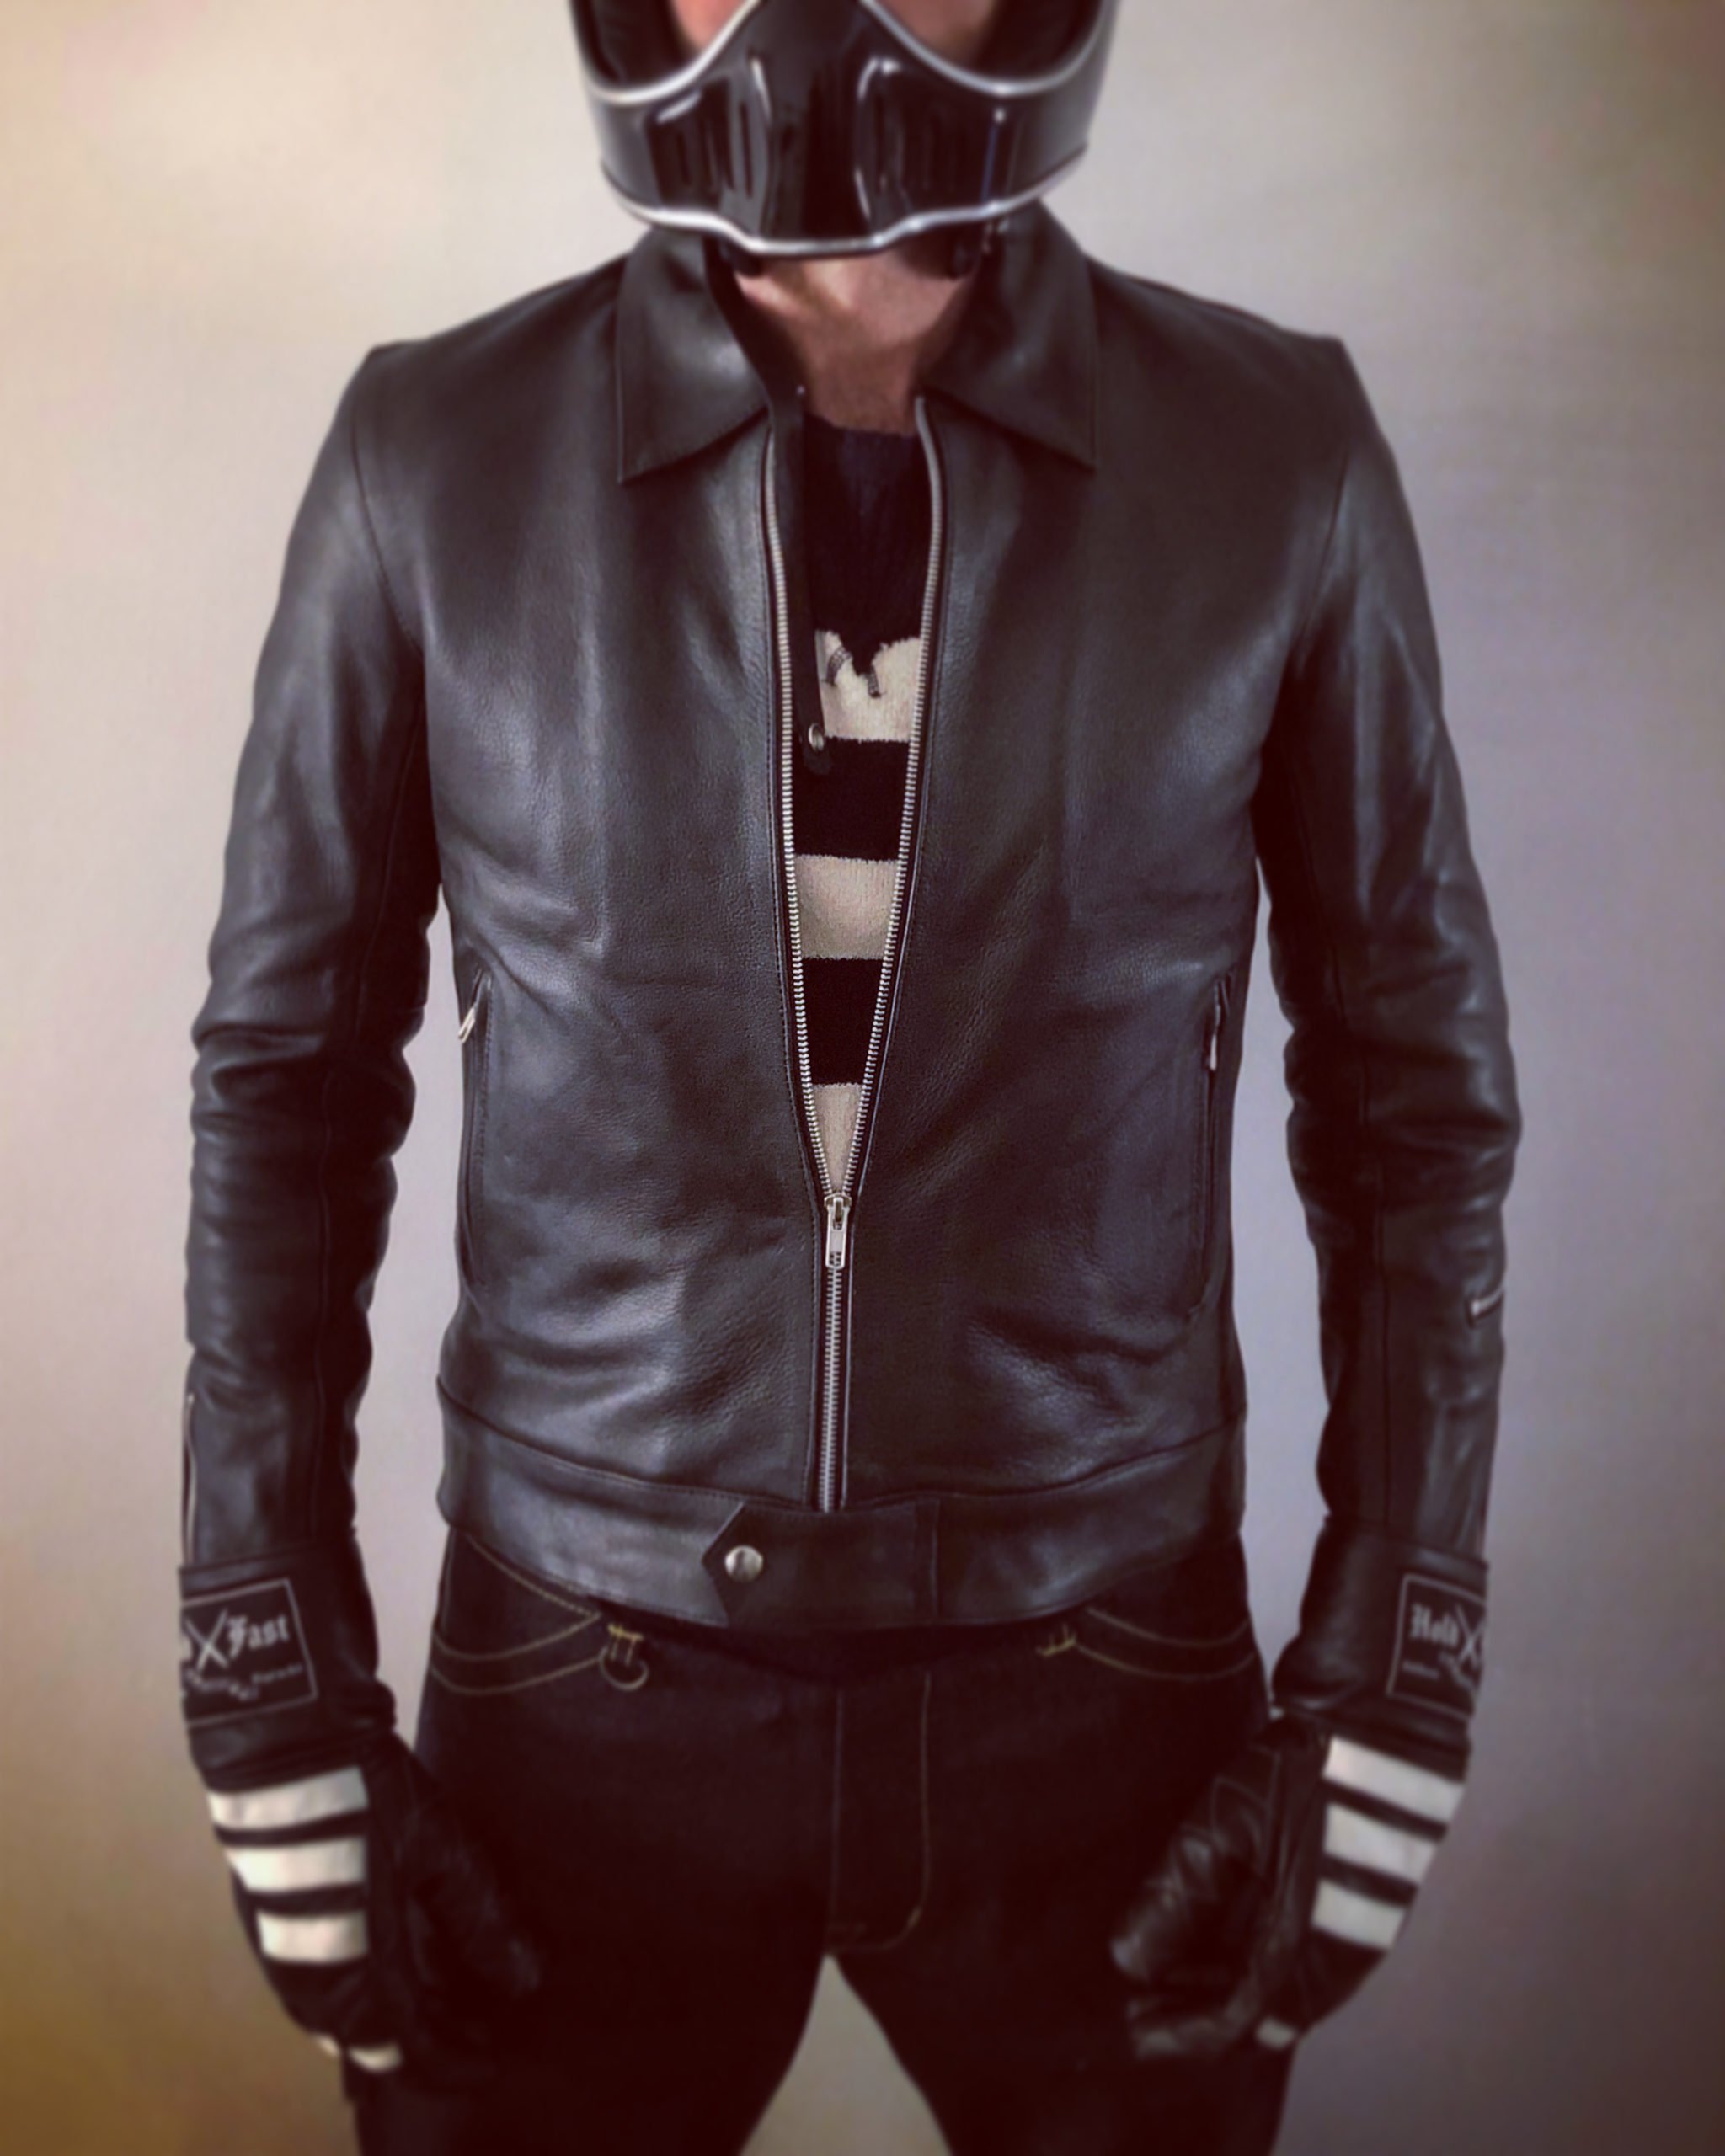 crowd radiator gap vintage Roadster Classic leather jacket by Hold Fast - school of cool